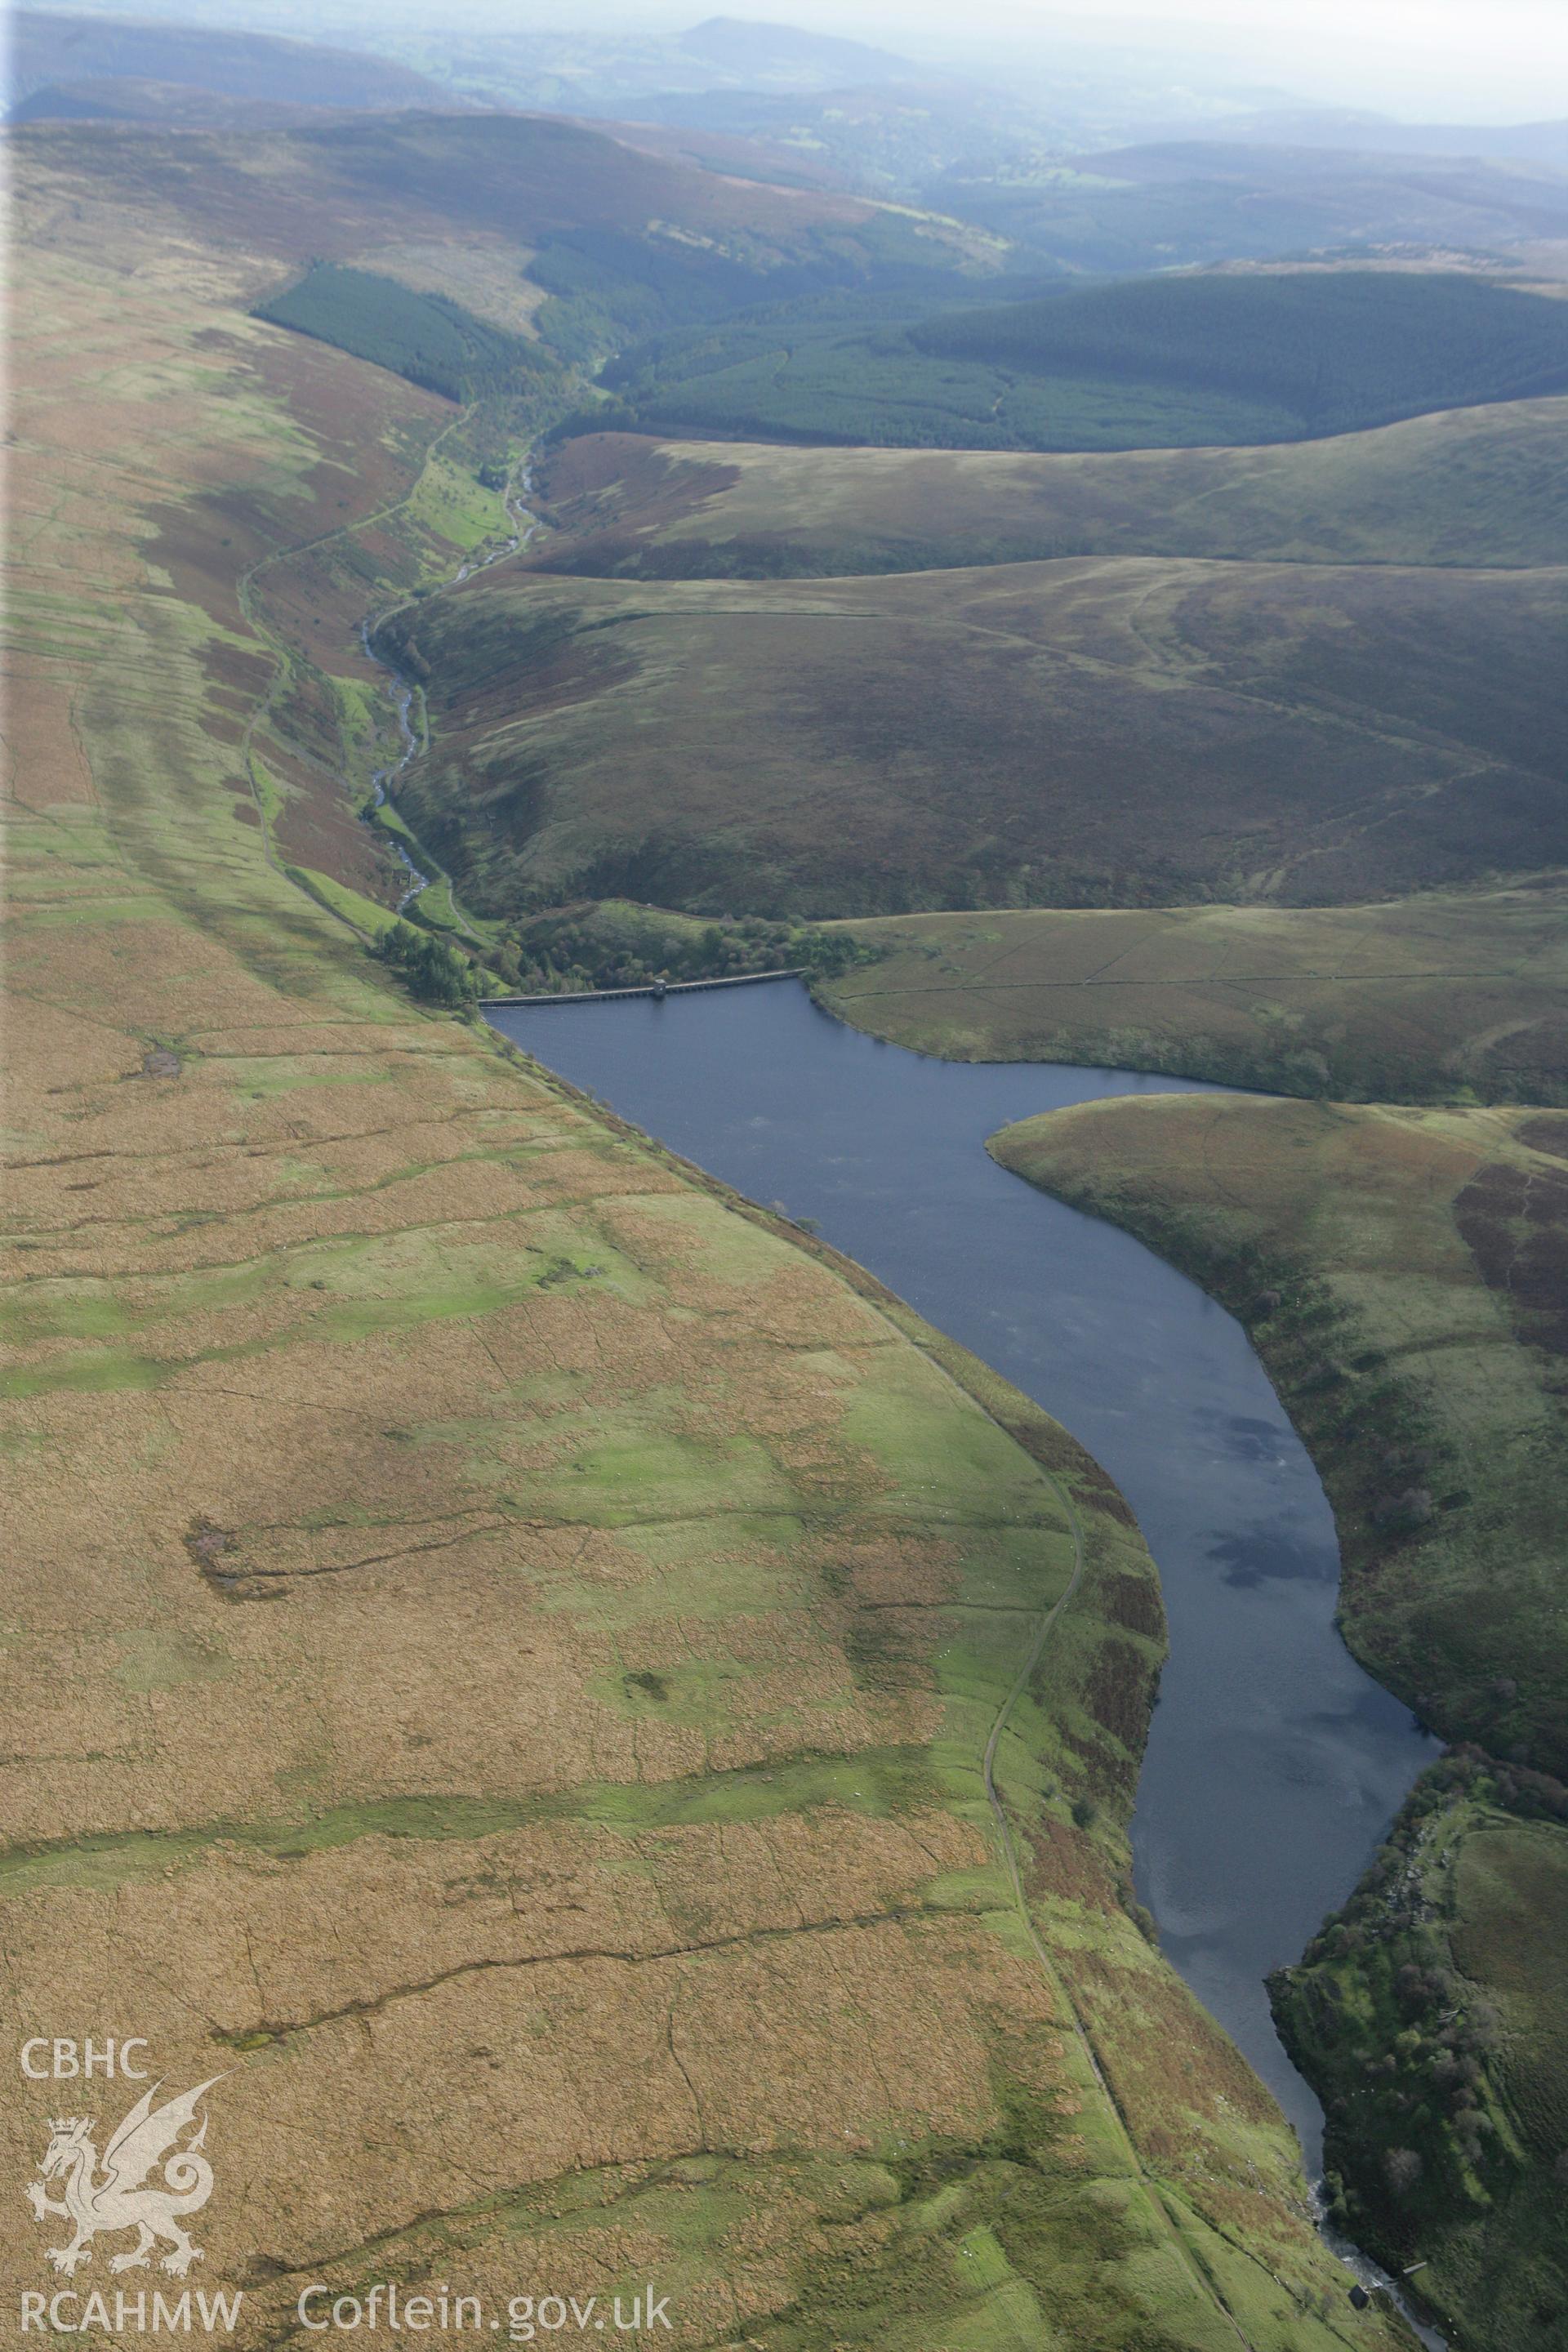 RCAHMW colour oblique photograph of Grwyne Fawr Reservoir, from the north-west. Taken by Toby Driver on 10/10/2008.